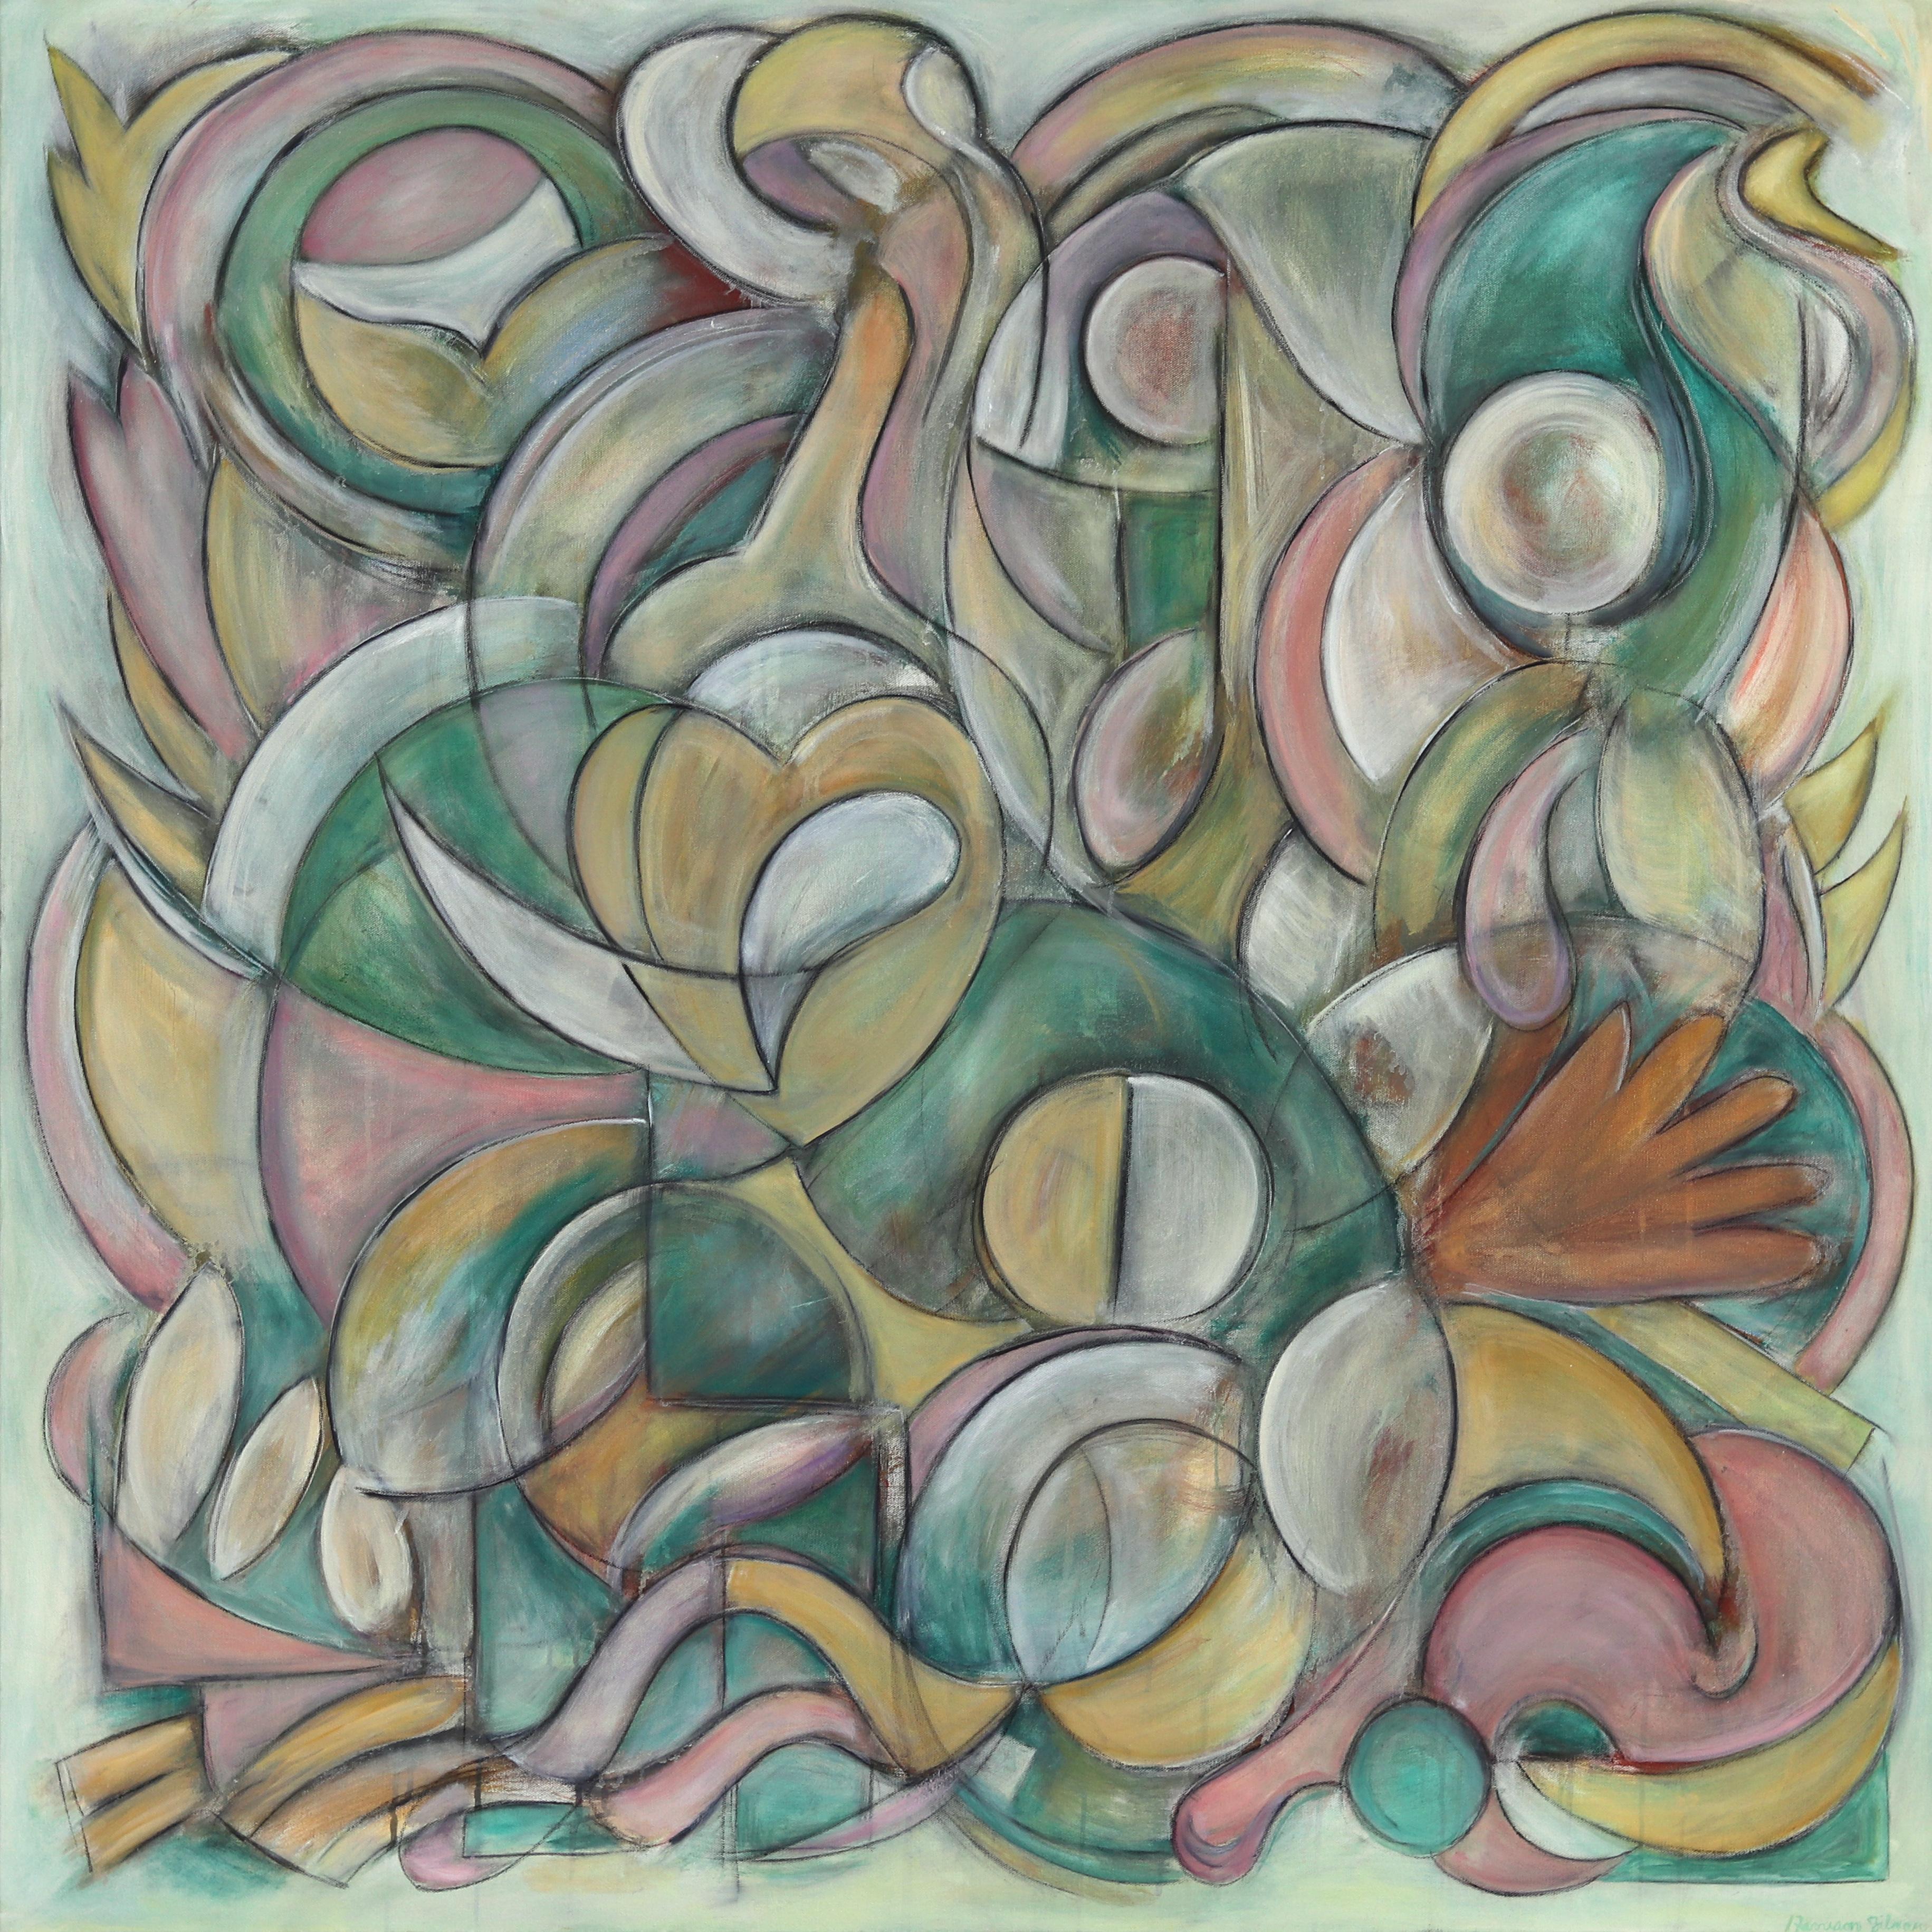 Song of the Sea - Large Contemporary Cubist Colorful Green Oil Painting Canvas - Mixed Media Art by Harrison Gilman